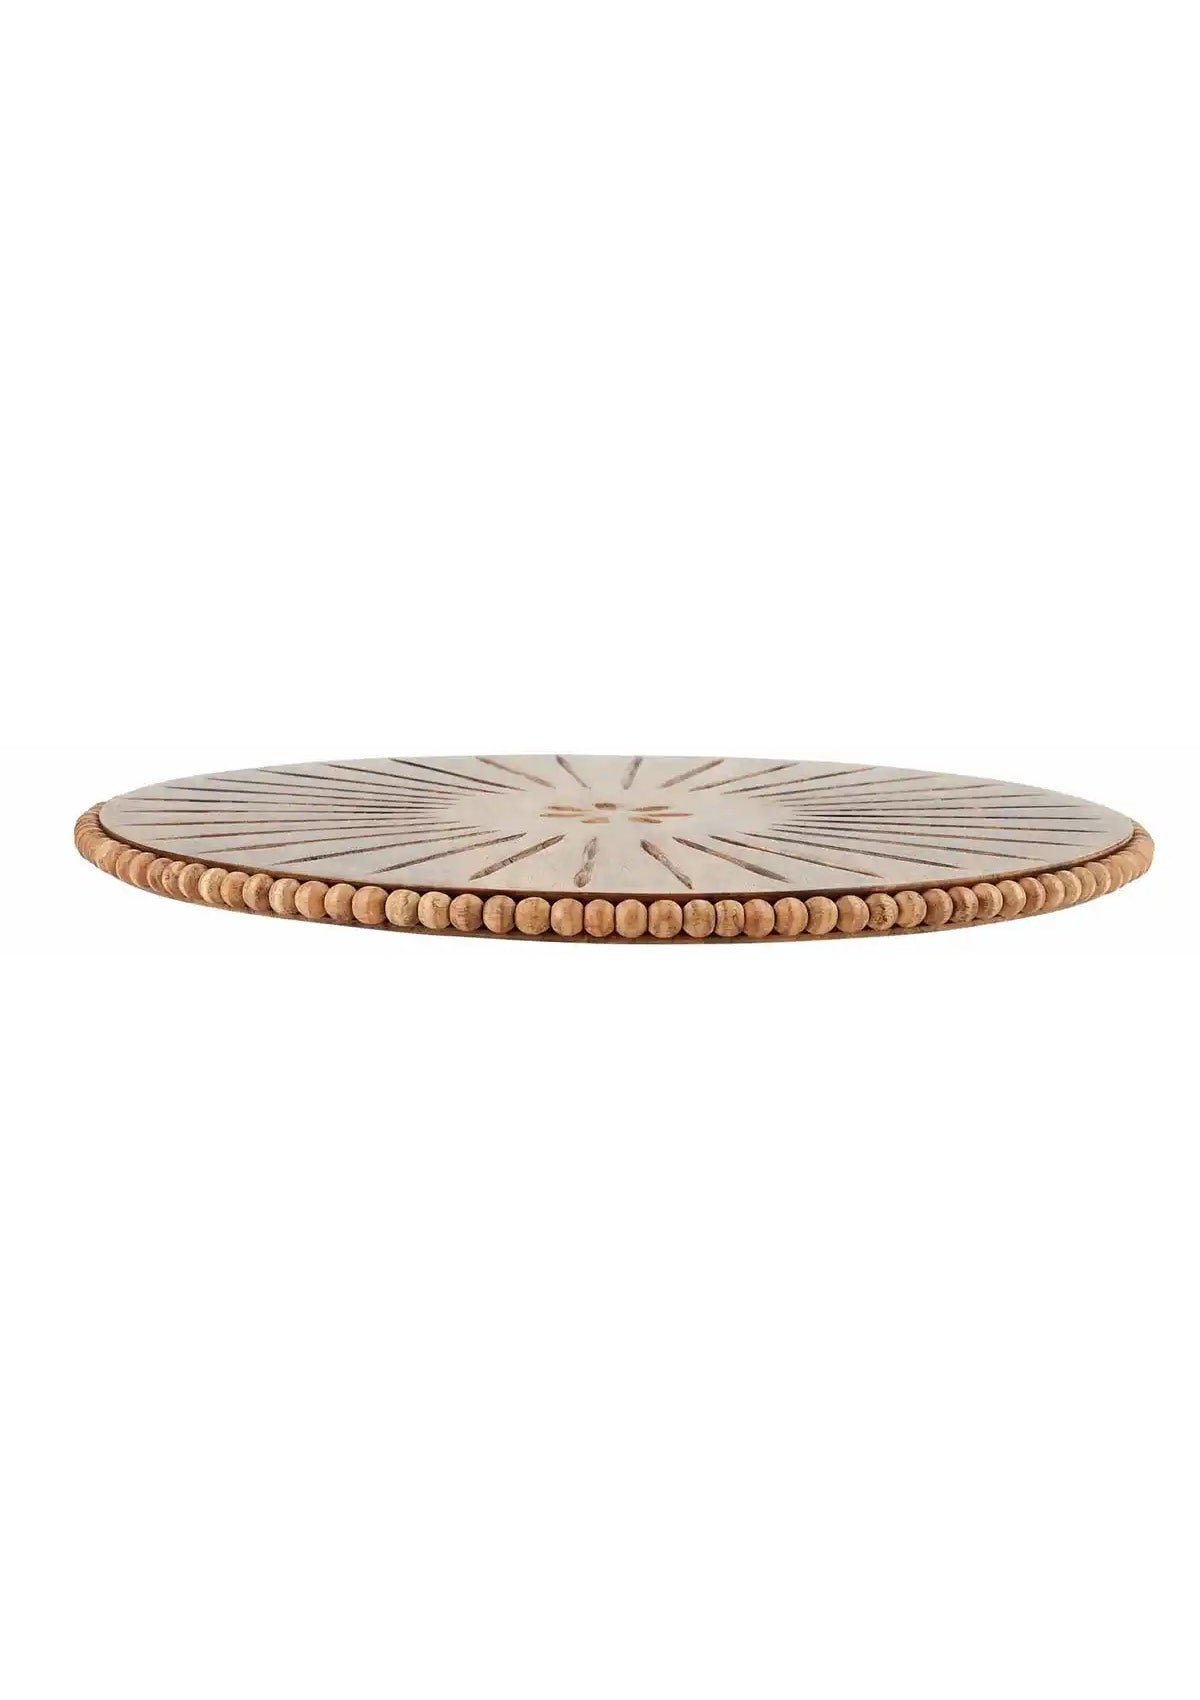 Carved Wooden Lazy Susan with Beaded Edge -Mud Pie- Ruby Jane-